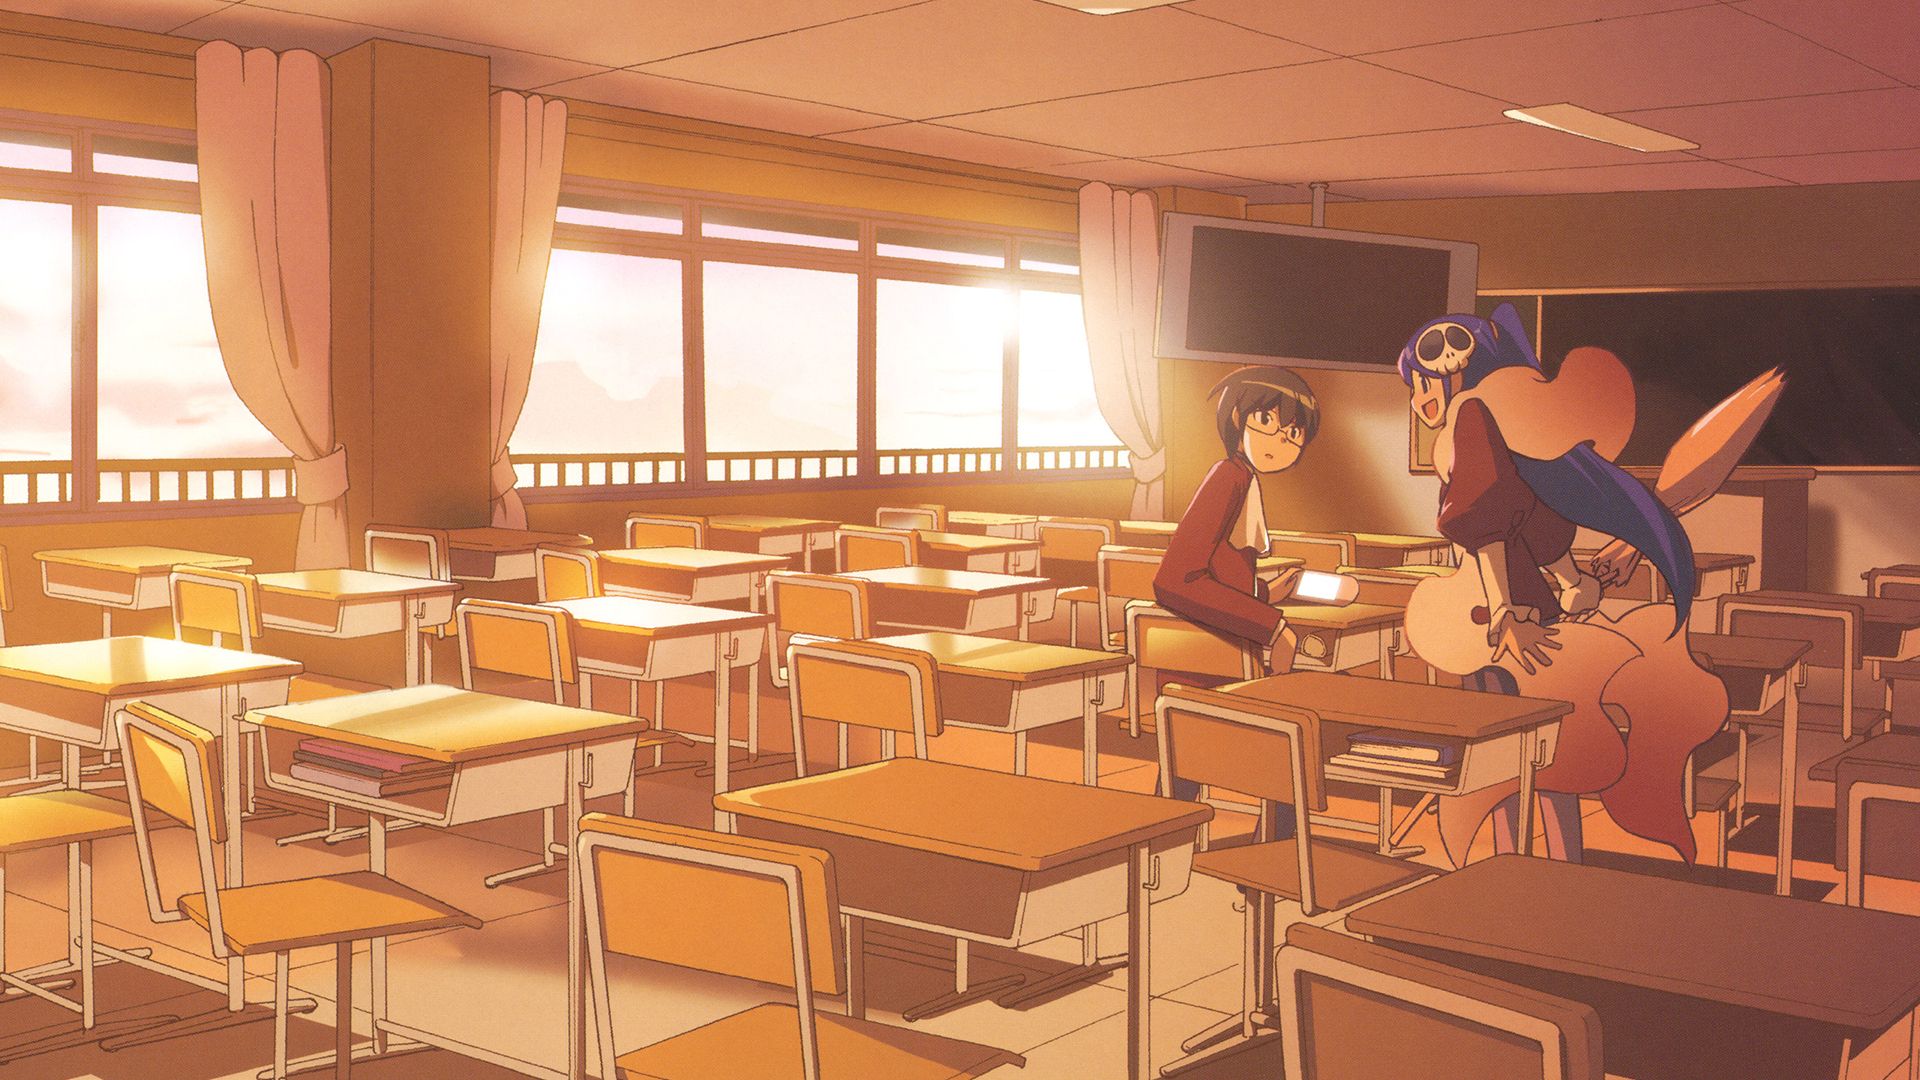 Free download Anime Classroom Background Classroom the wallpaper [1920x1200] for your Desktop, Mobile & Tablet. Explore School Classroom Wallpaper. Assassination Classroom Wallpaper HD, Classroom Wallpaper for Computer